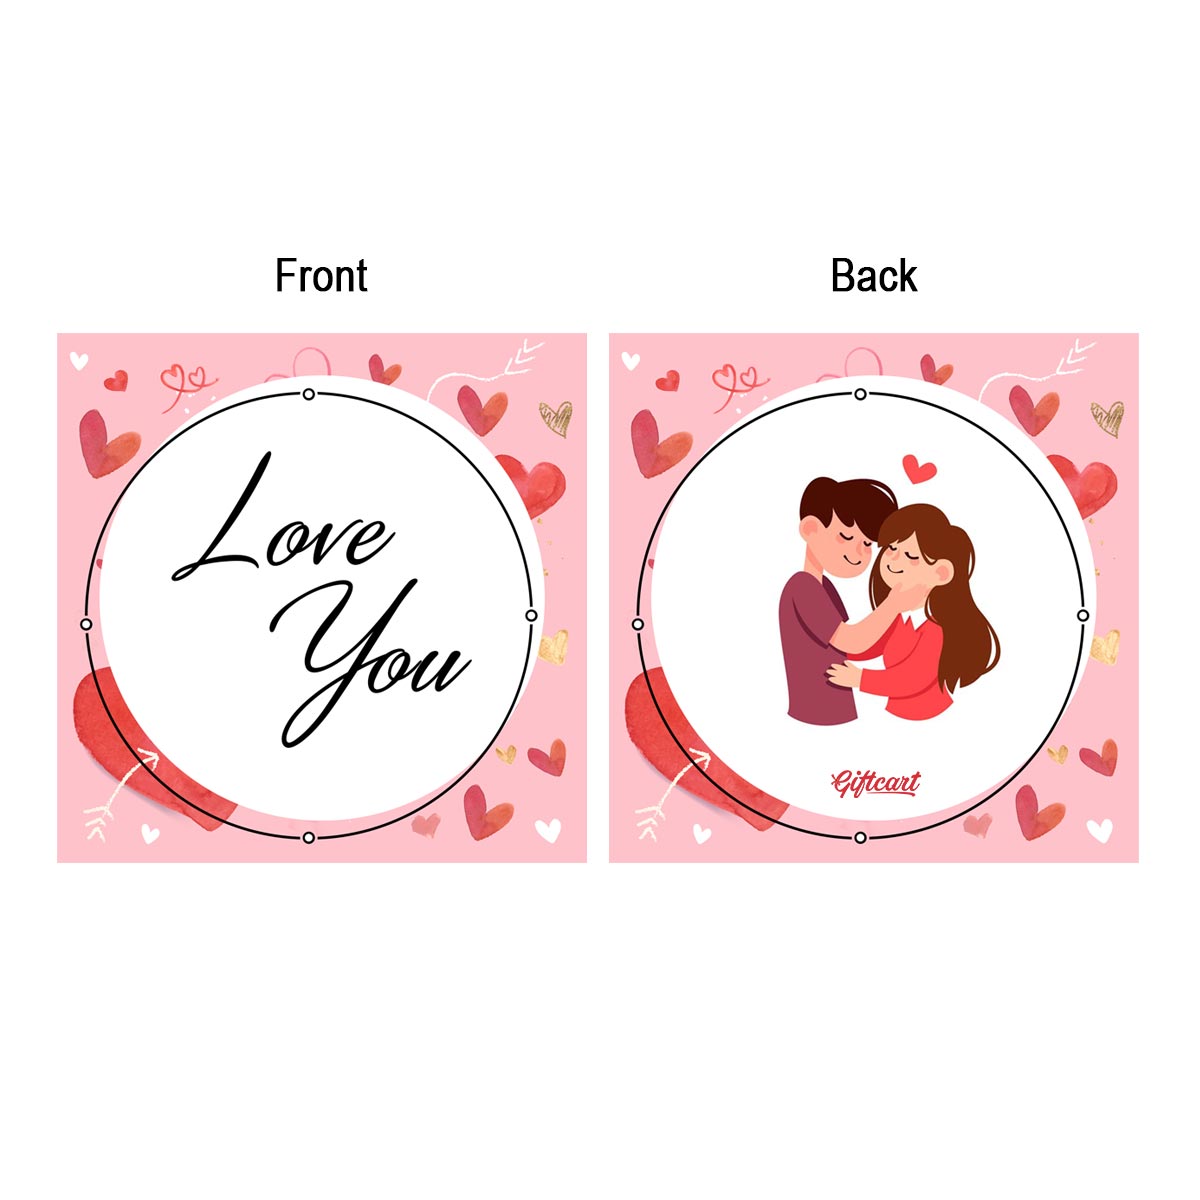 5 Romantic Ways to Say 'I LOVE YOU' with a Gift Giftalove Blog - Ideas,  Inspiration, Latest trends to quick DIY and easy how–tos